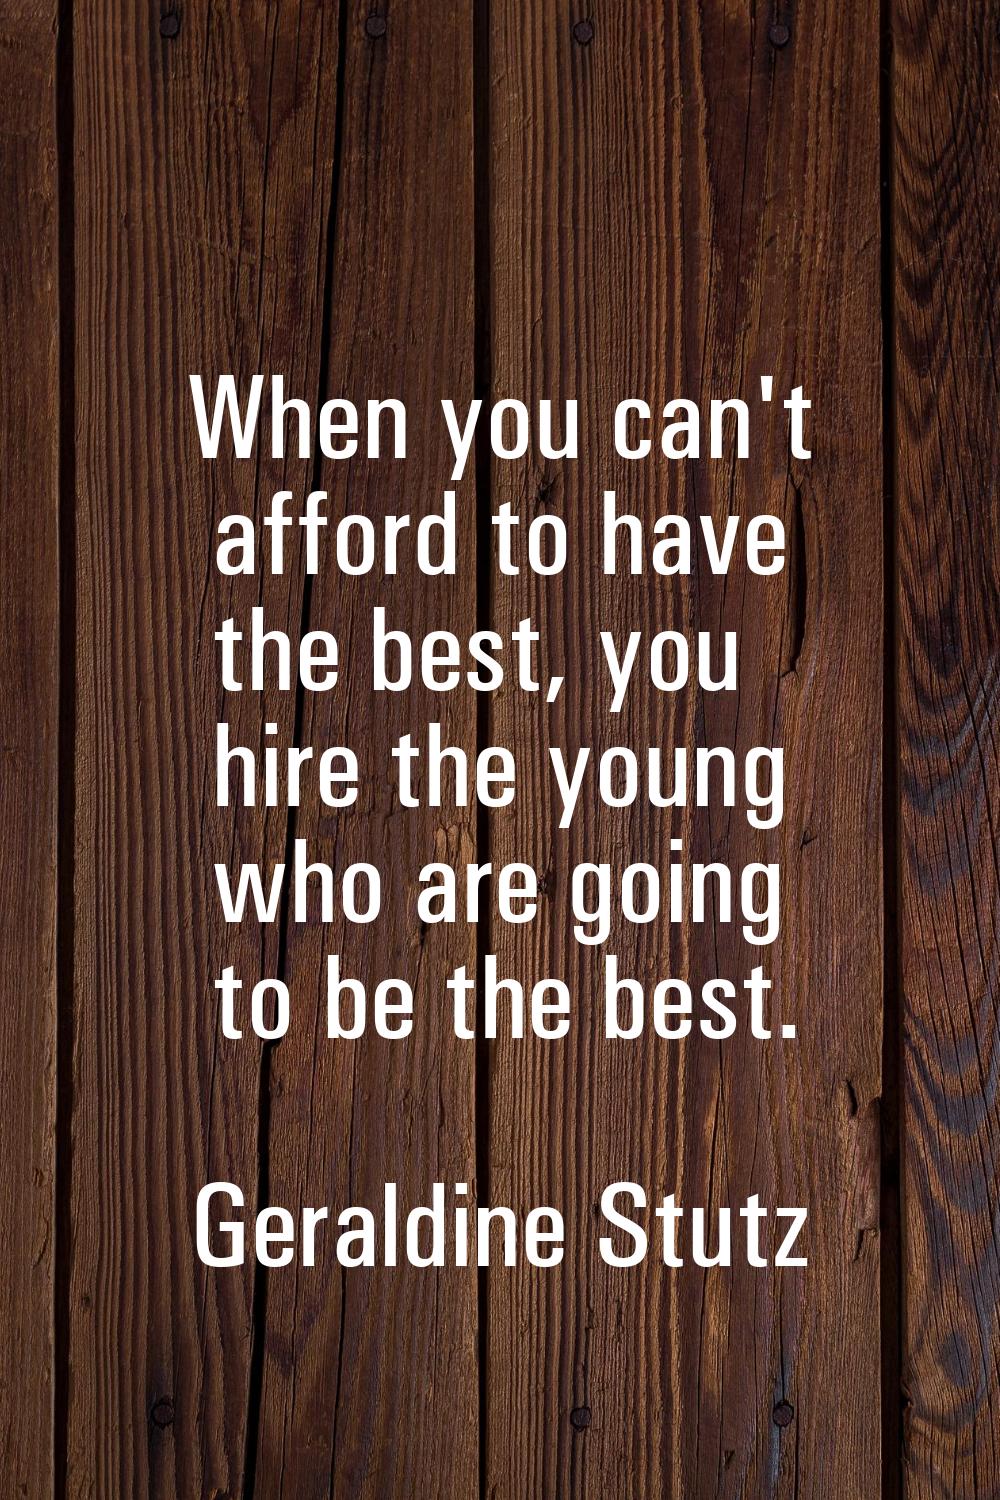 When you can't afford to have the best, you hire the young who are going to be the best.